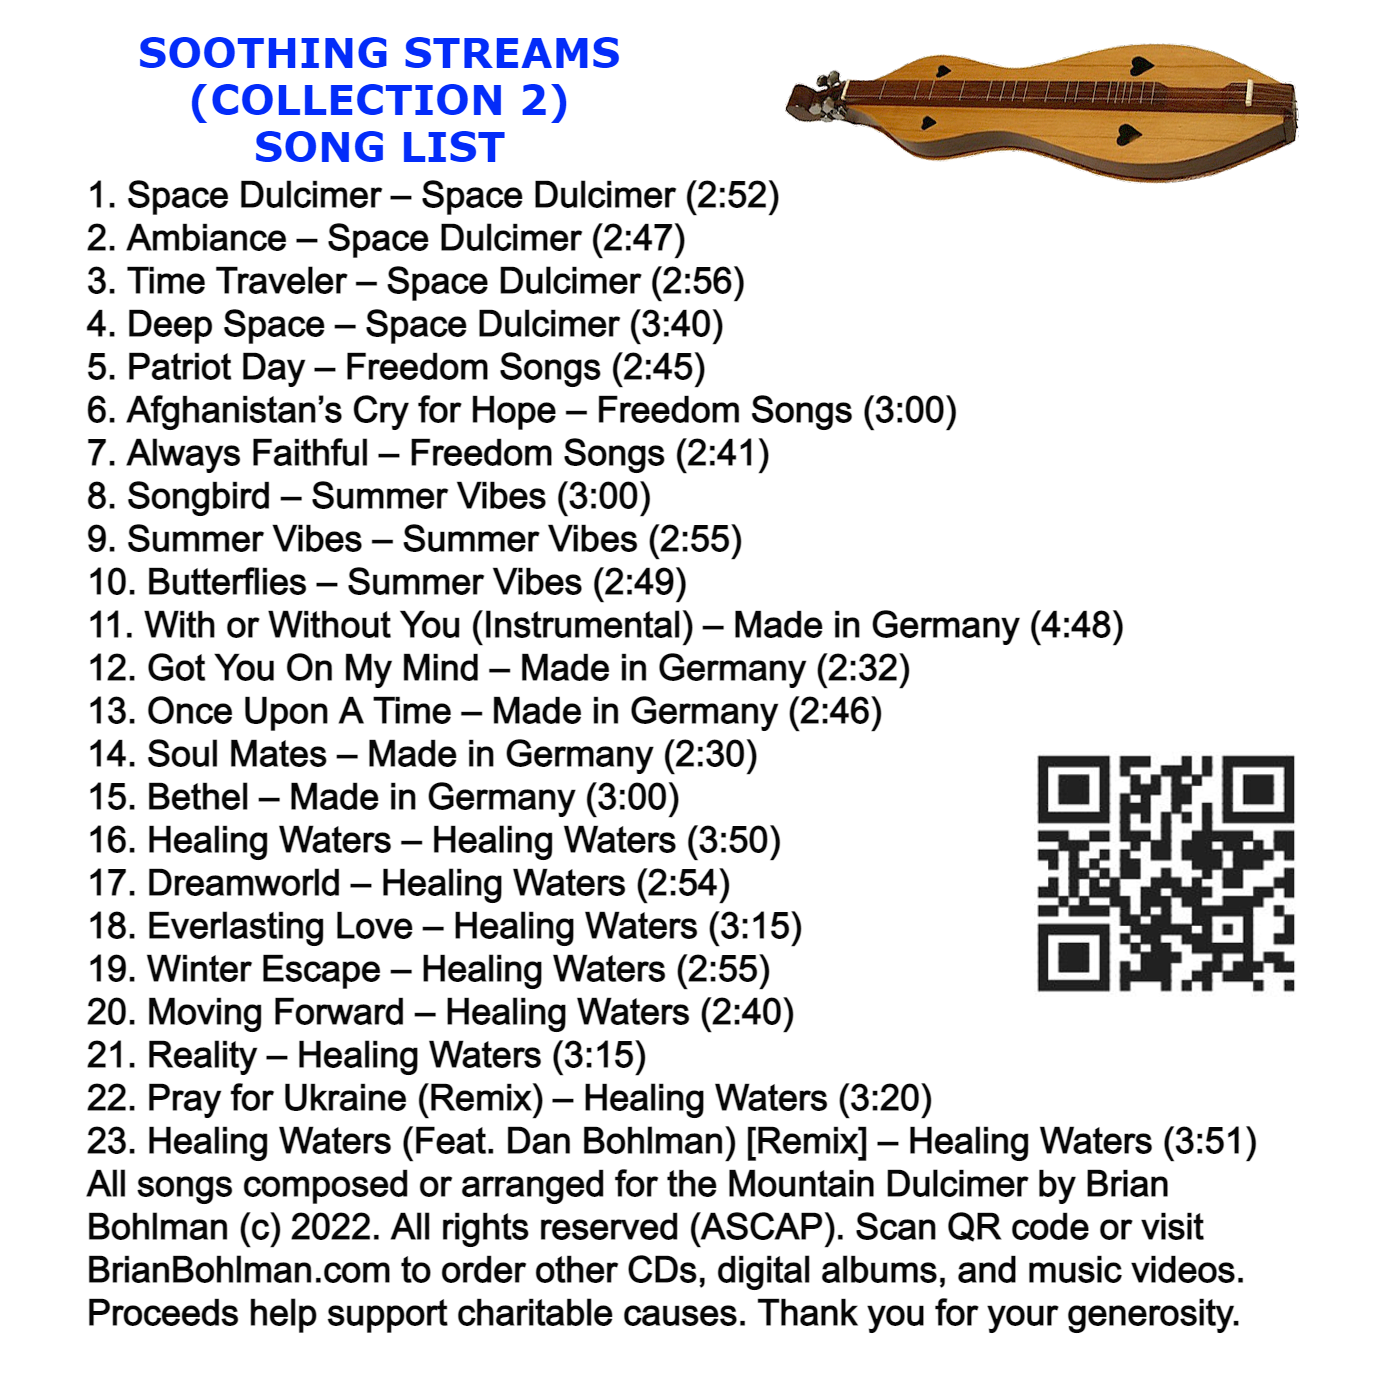 SOOTHING STREAMS: Relaxing Mountain Dulcimer Instrumentals (Collection 2) Music CD by Brian Bohlman